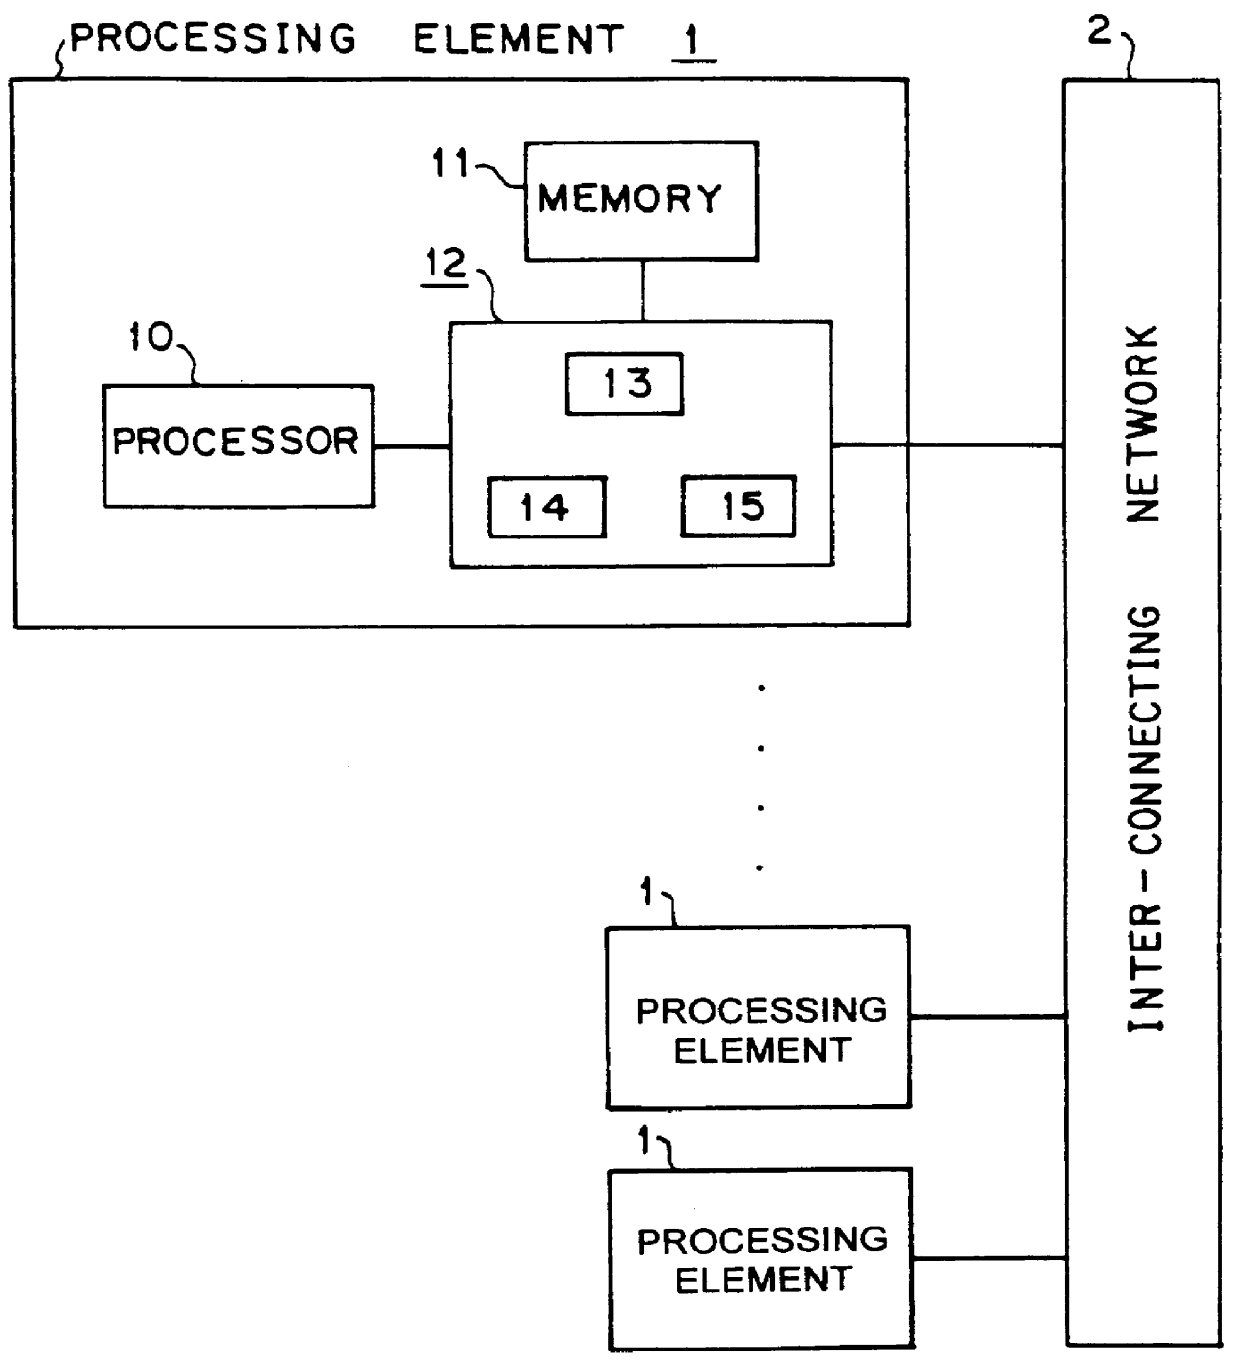 Parallel computer which verifies direct data transmission between local memories with a send complete flag